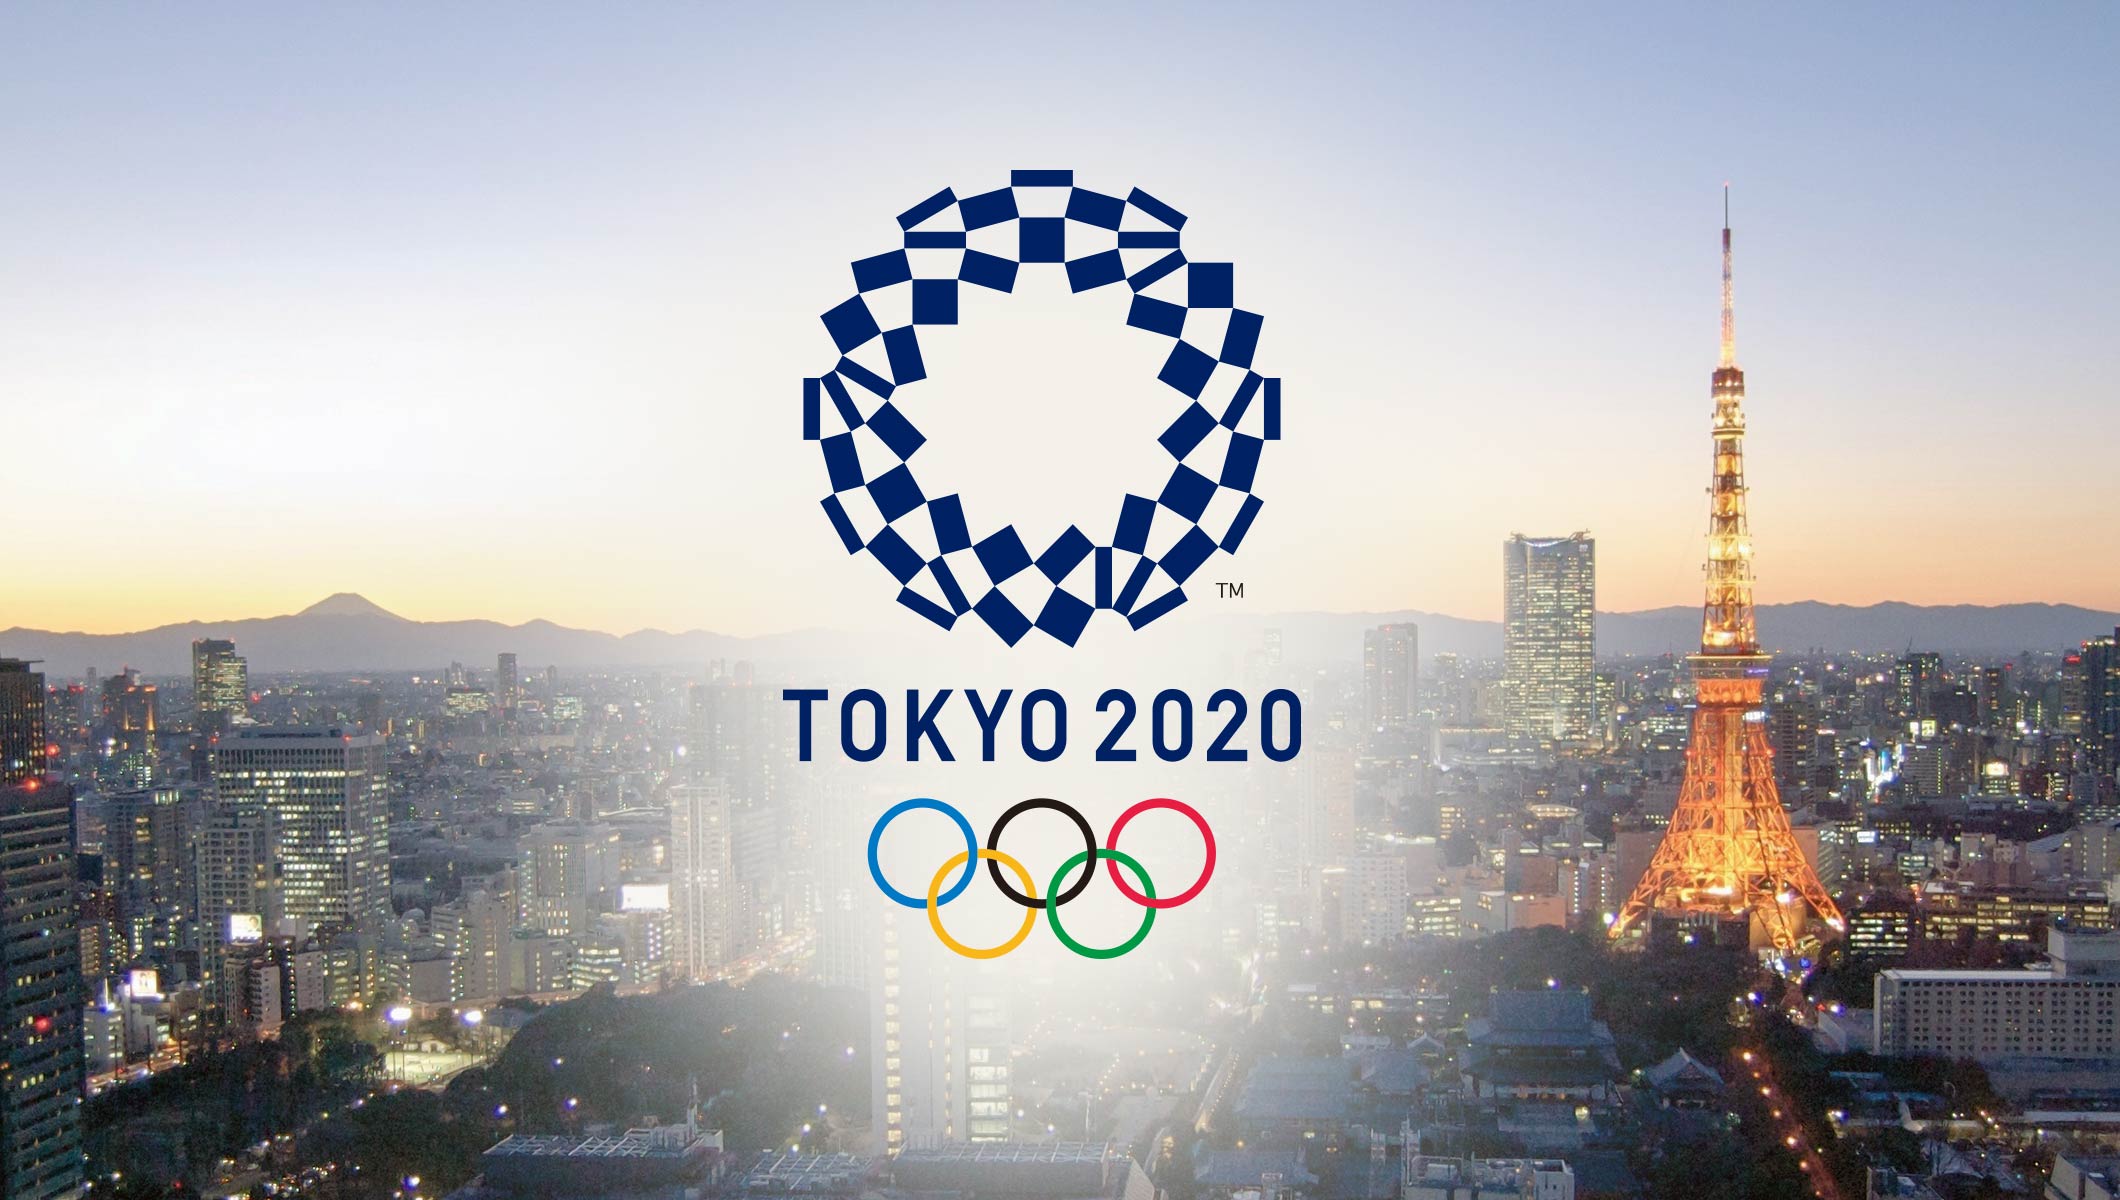 TOKYO 2020 TO ORGANISE INNOVATIVE AND ENGAGING GAMES